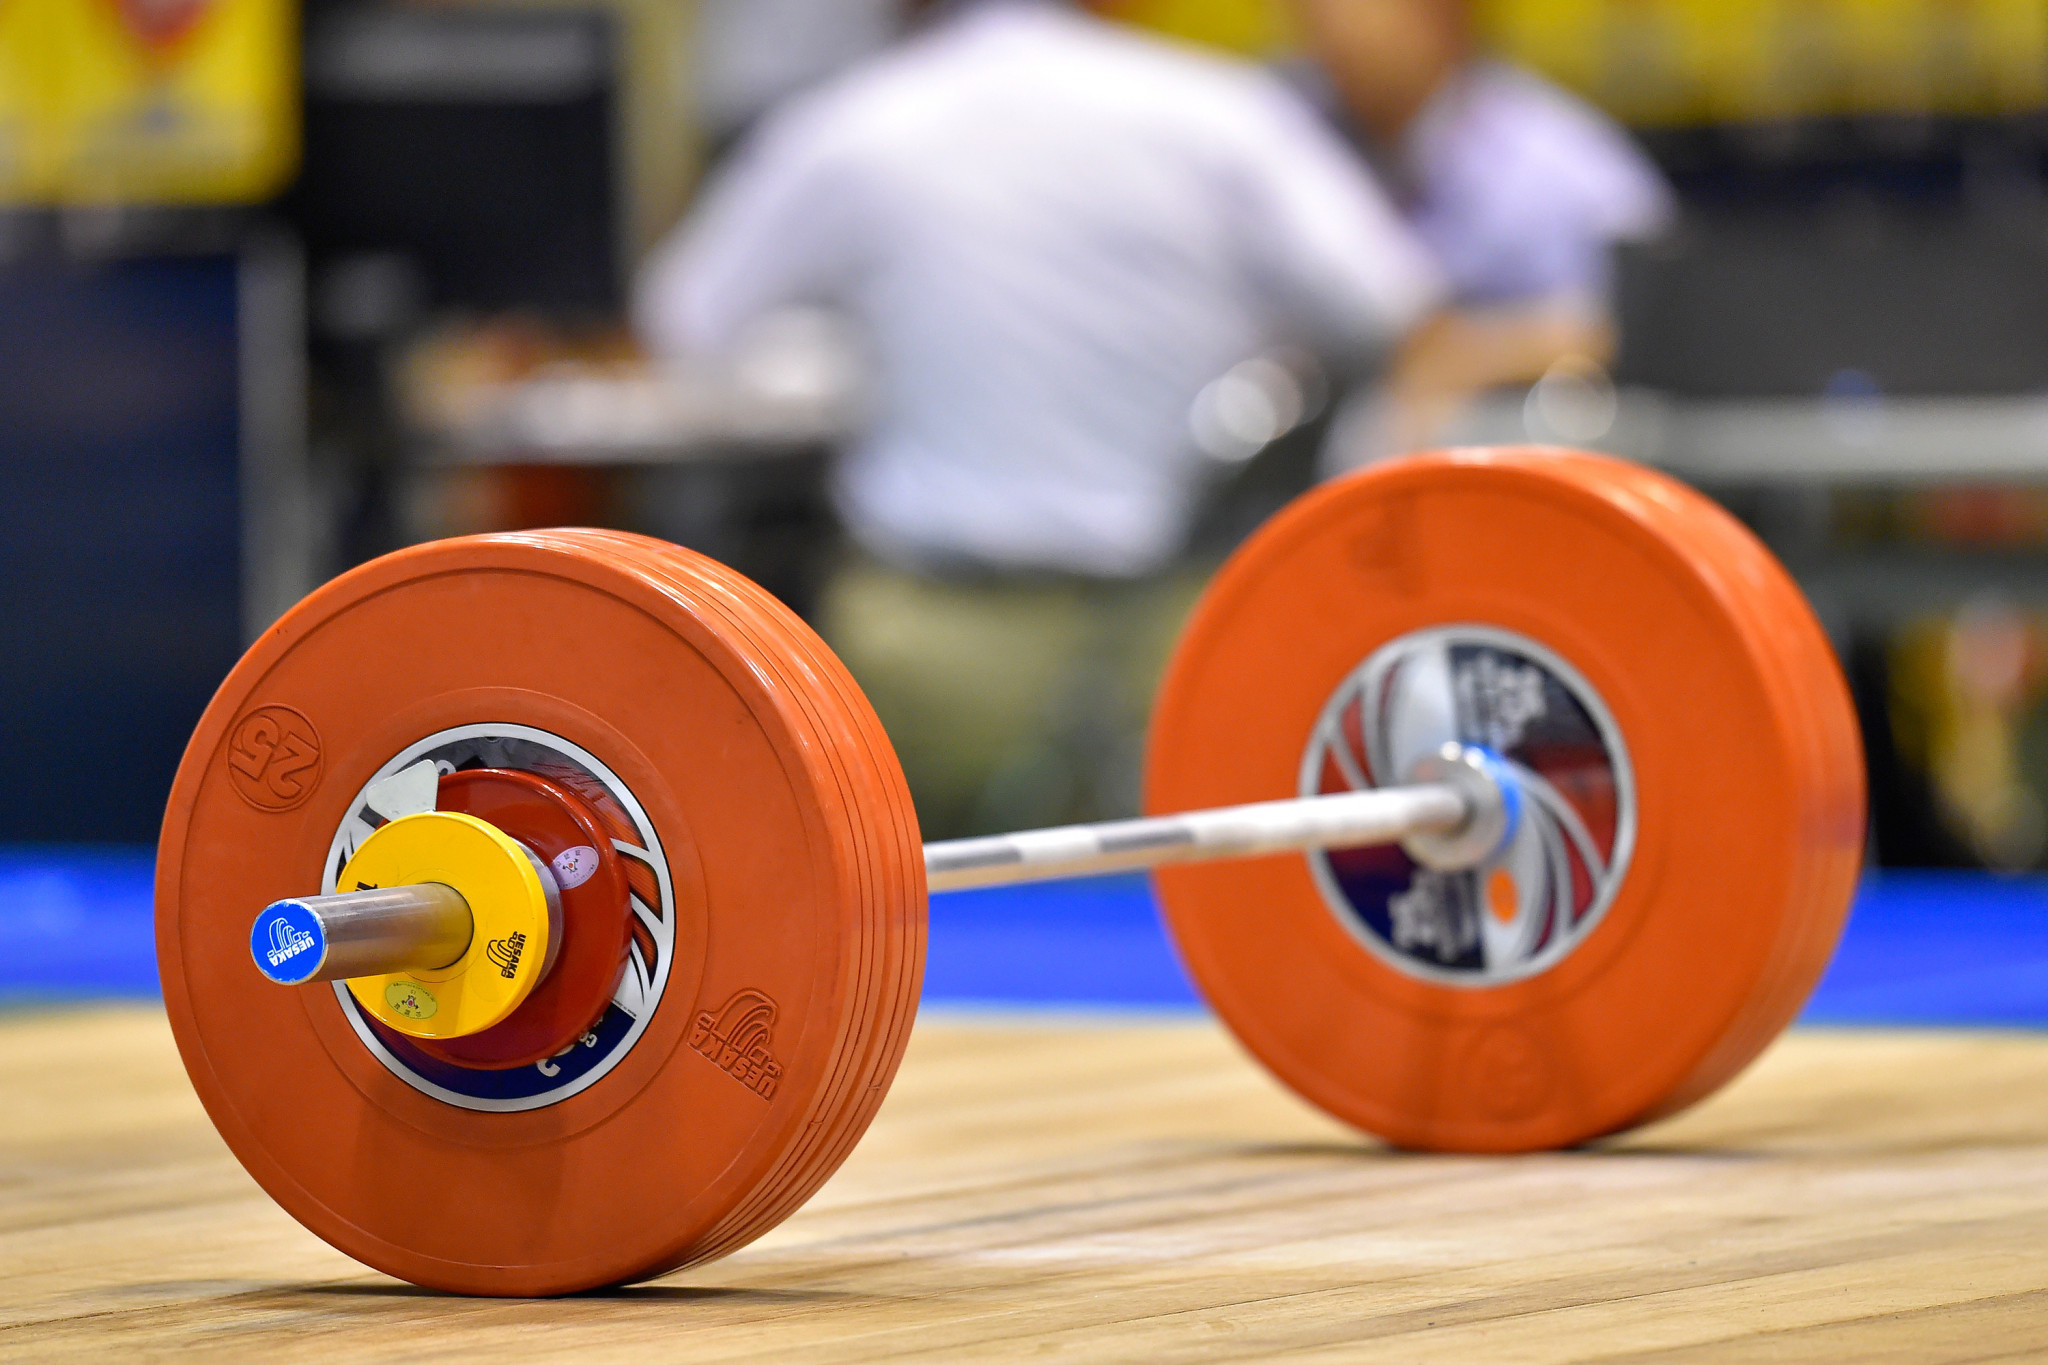 The IWF has launched a street weightlifting competition, set to take place in Lausanne ©Getty Images